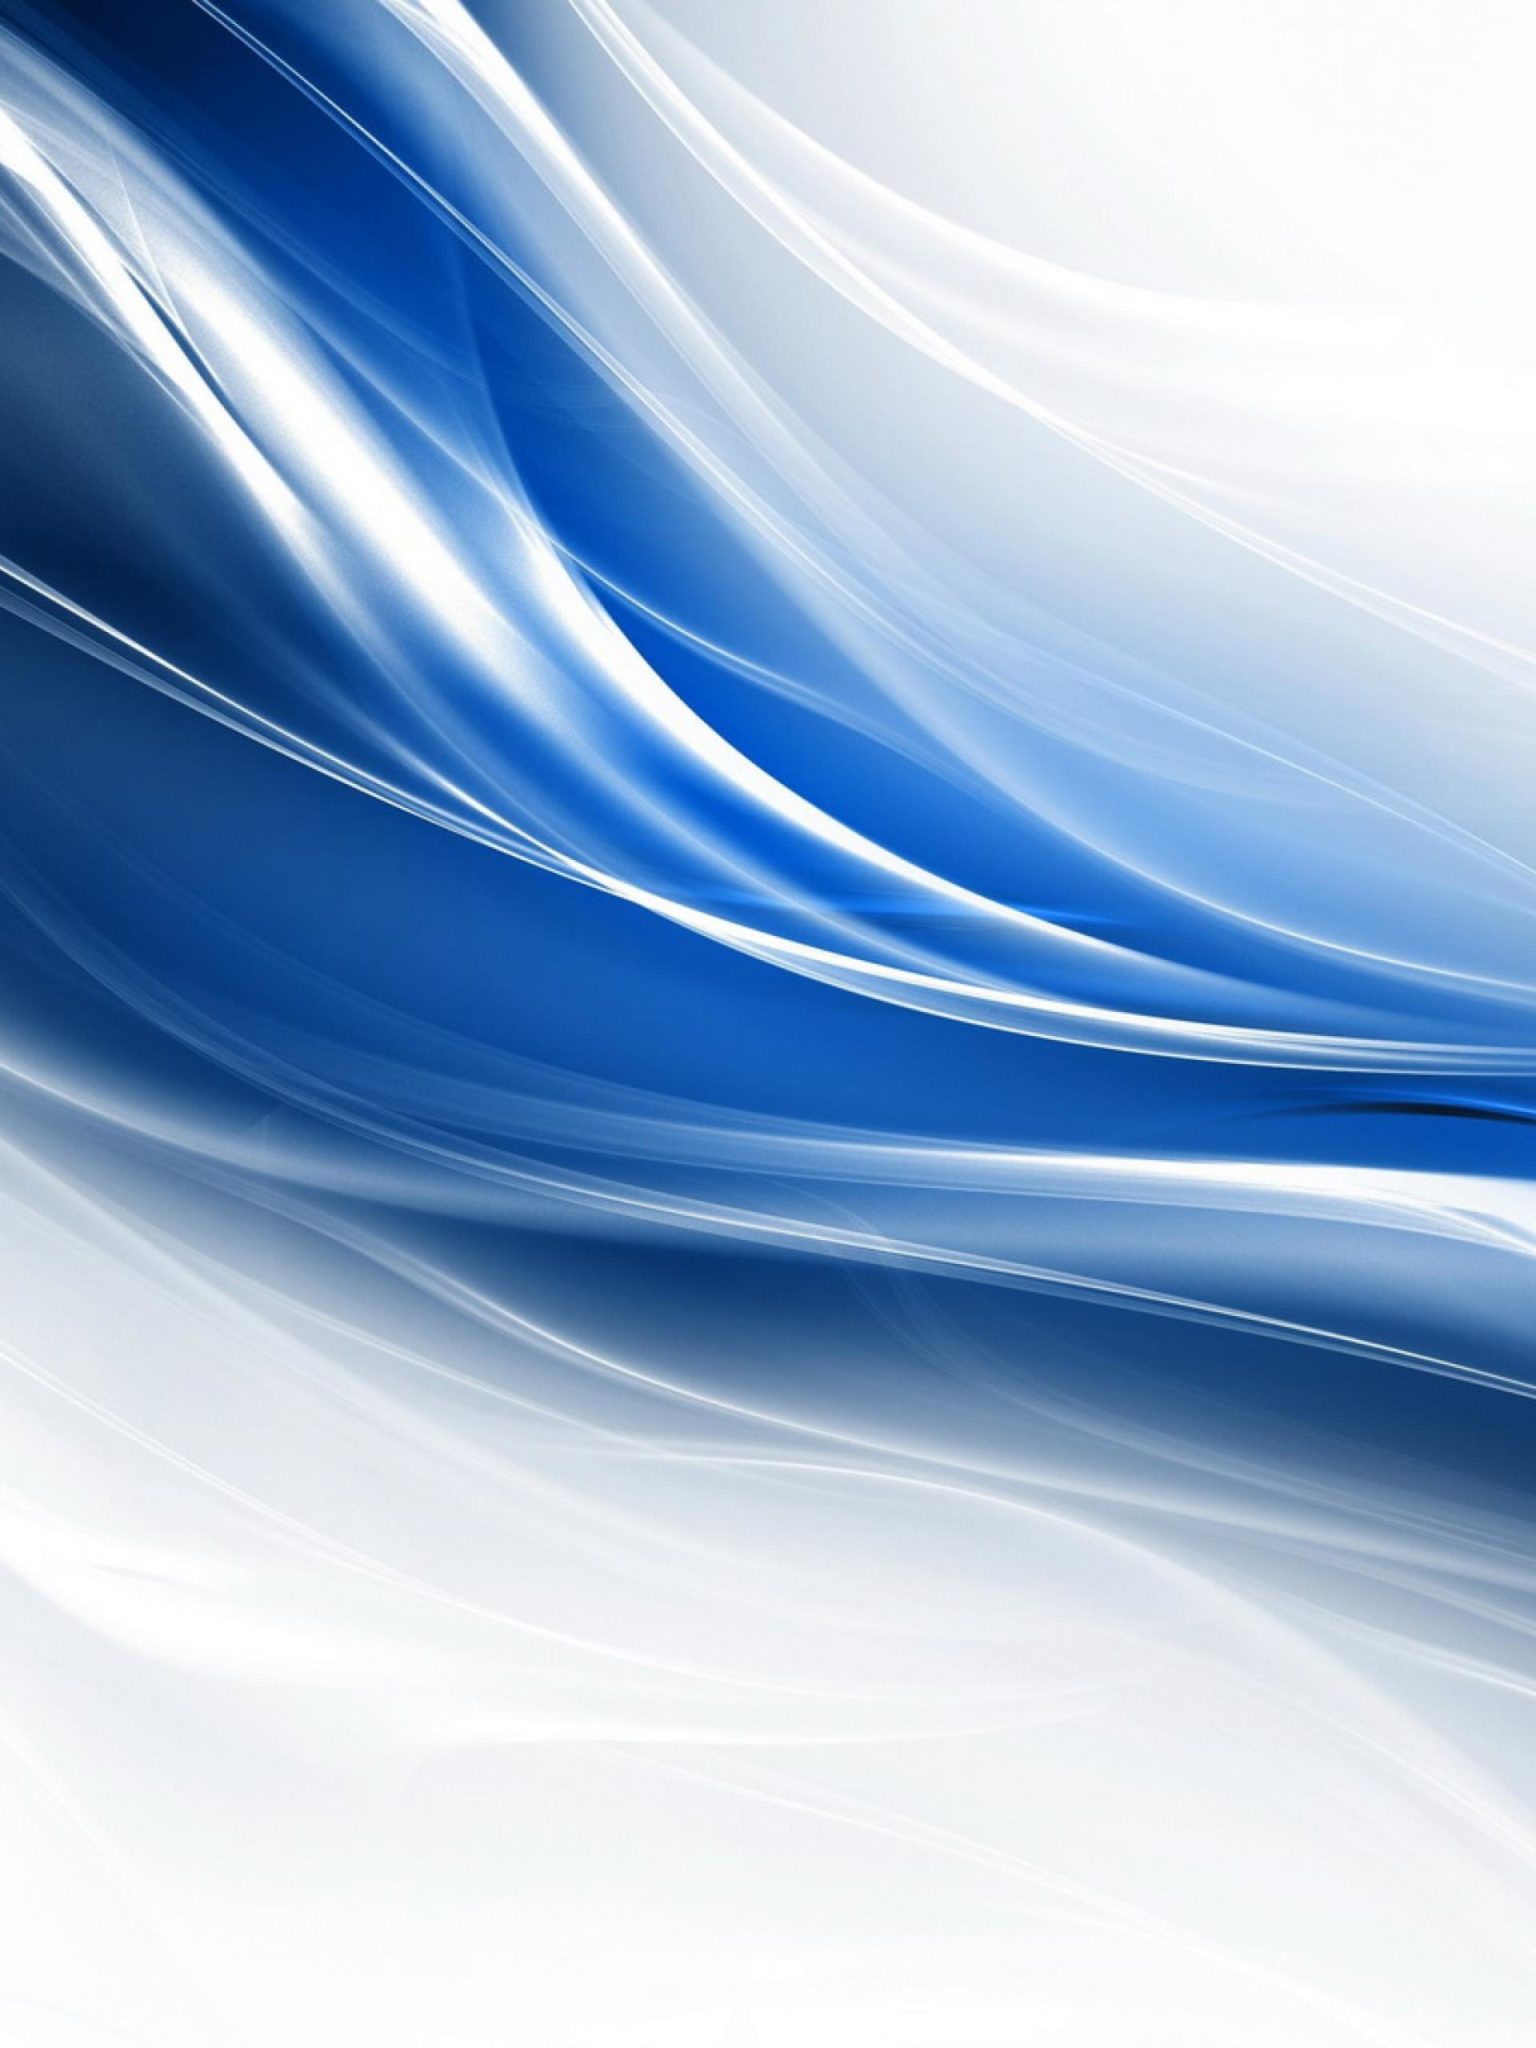 Simple Blue Abstract Wallpaper HD Wallpapers Backgrounds Images